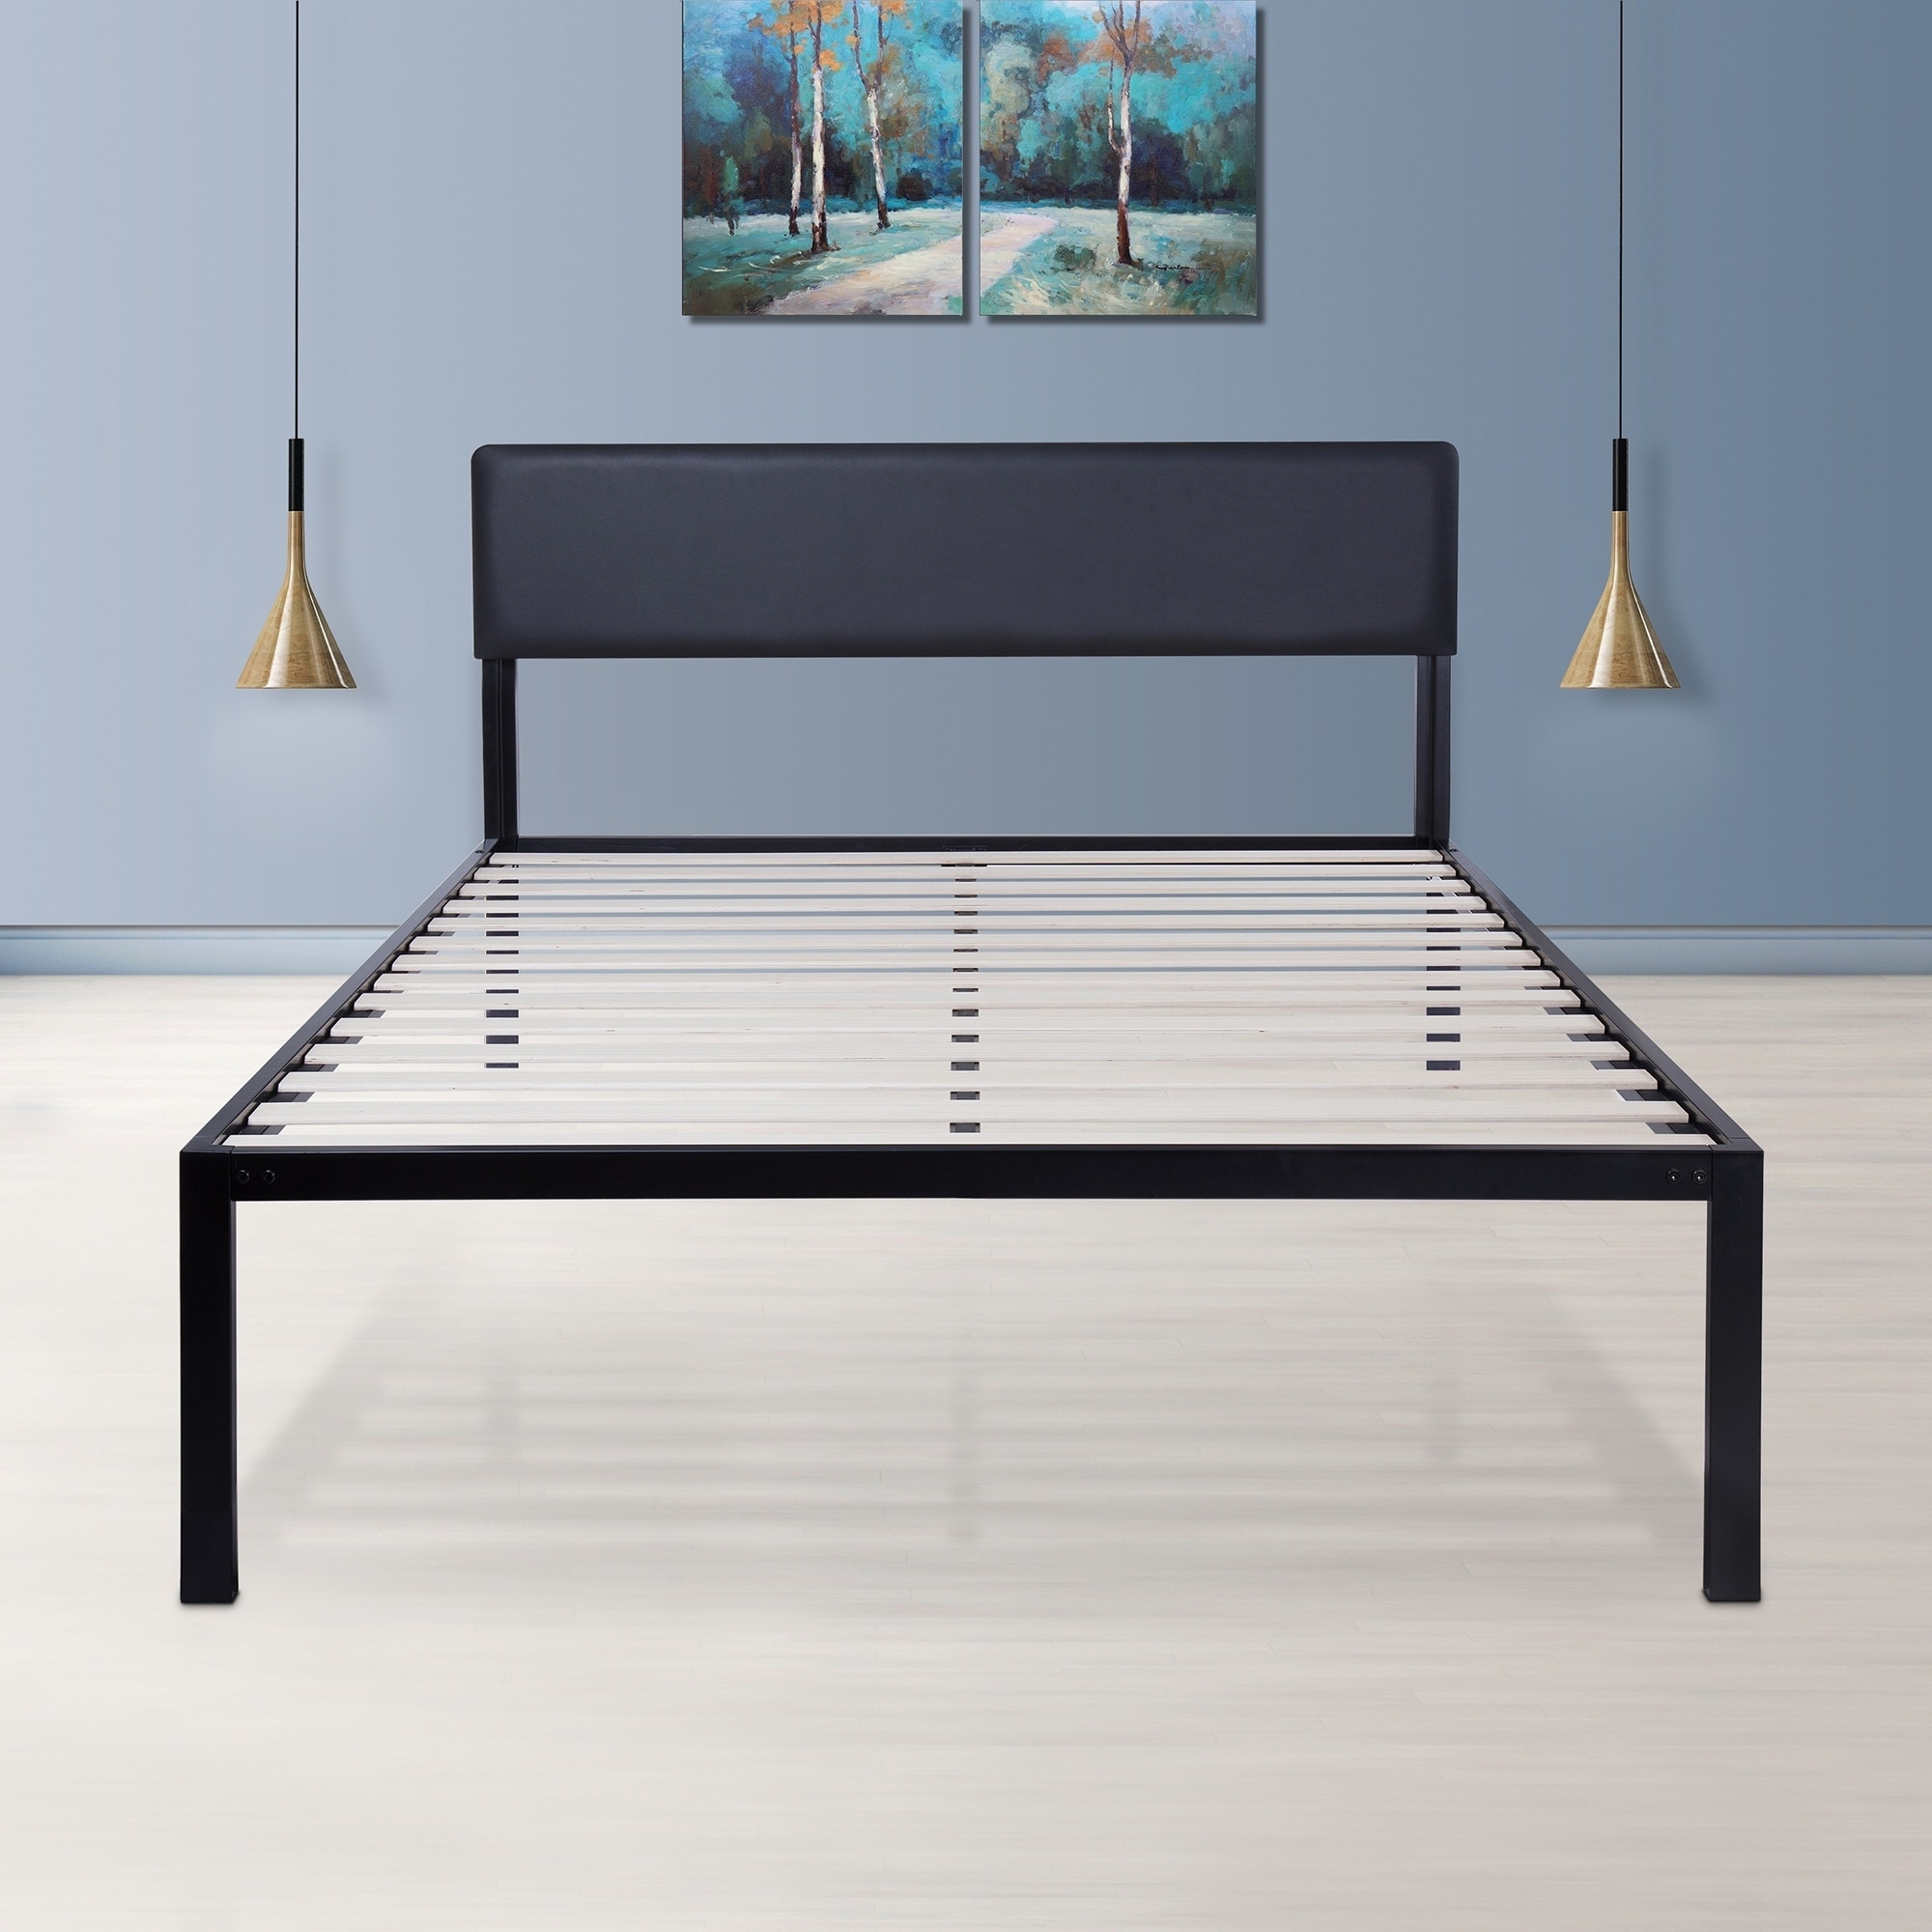 Sleeplanner 18-inch Queen-Size Metal Bed Frame with Faux Leather